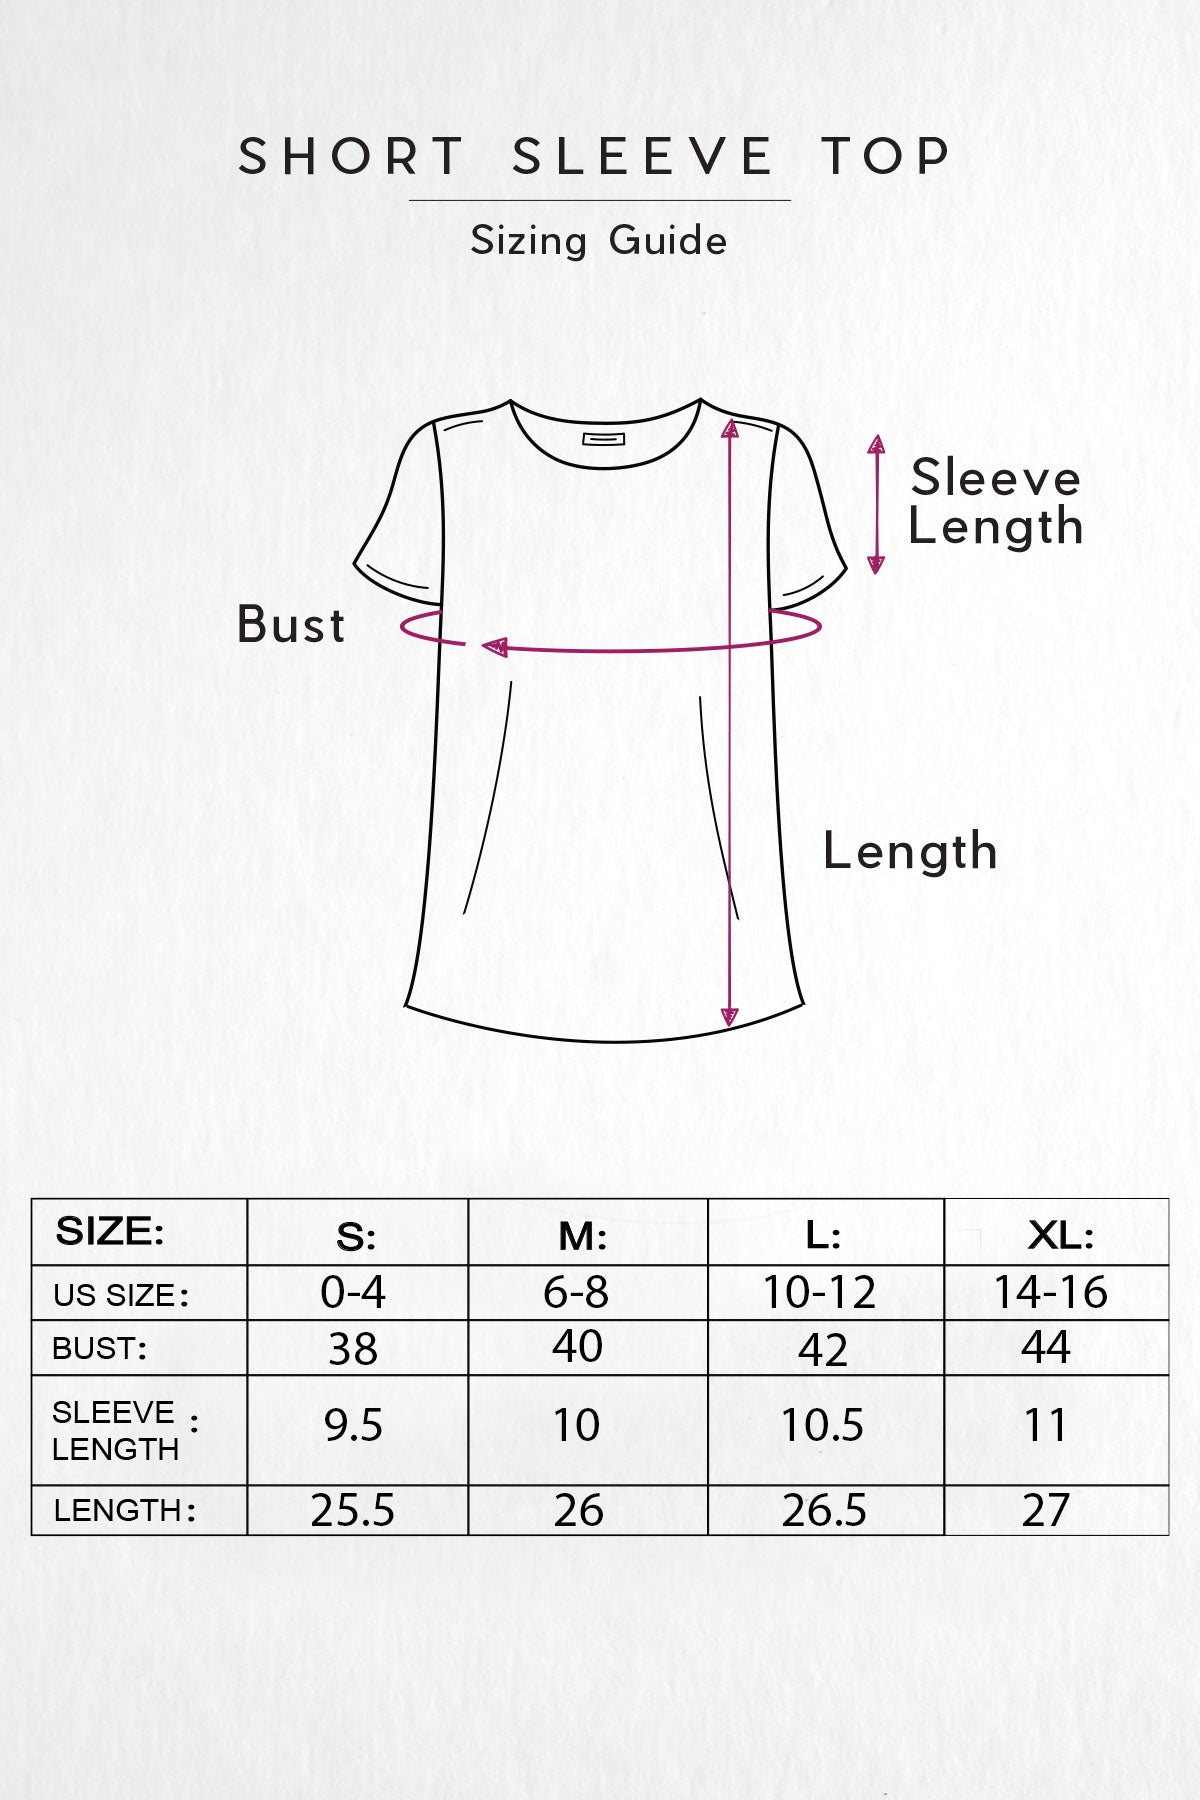 Short Sleeve Top Sizing Guide